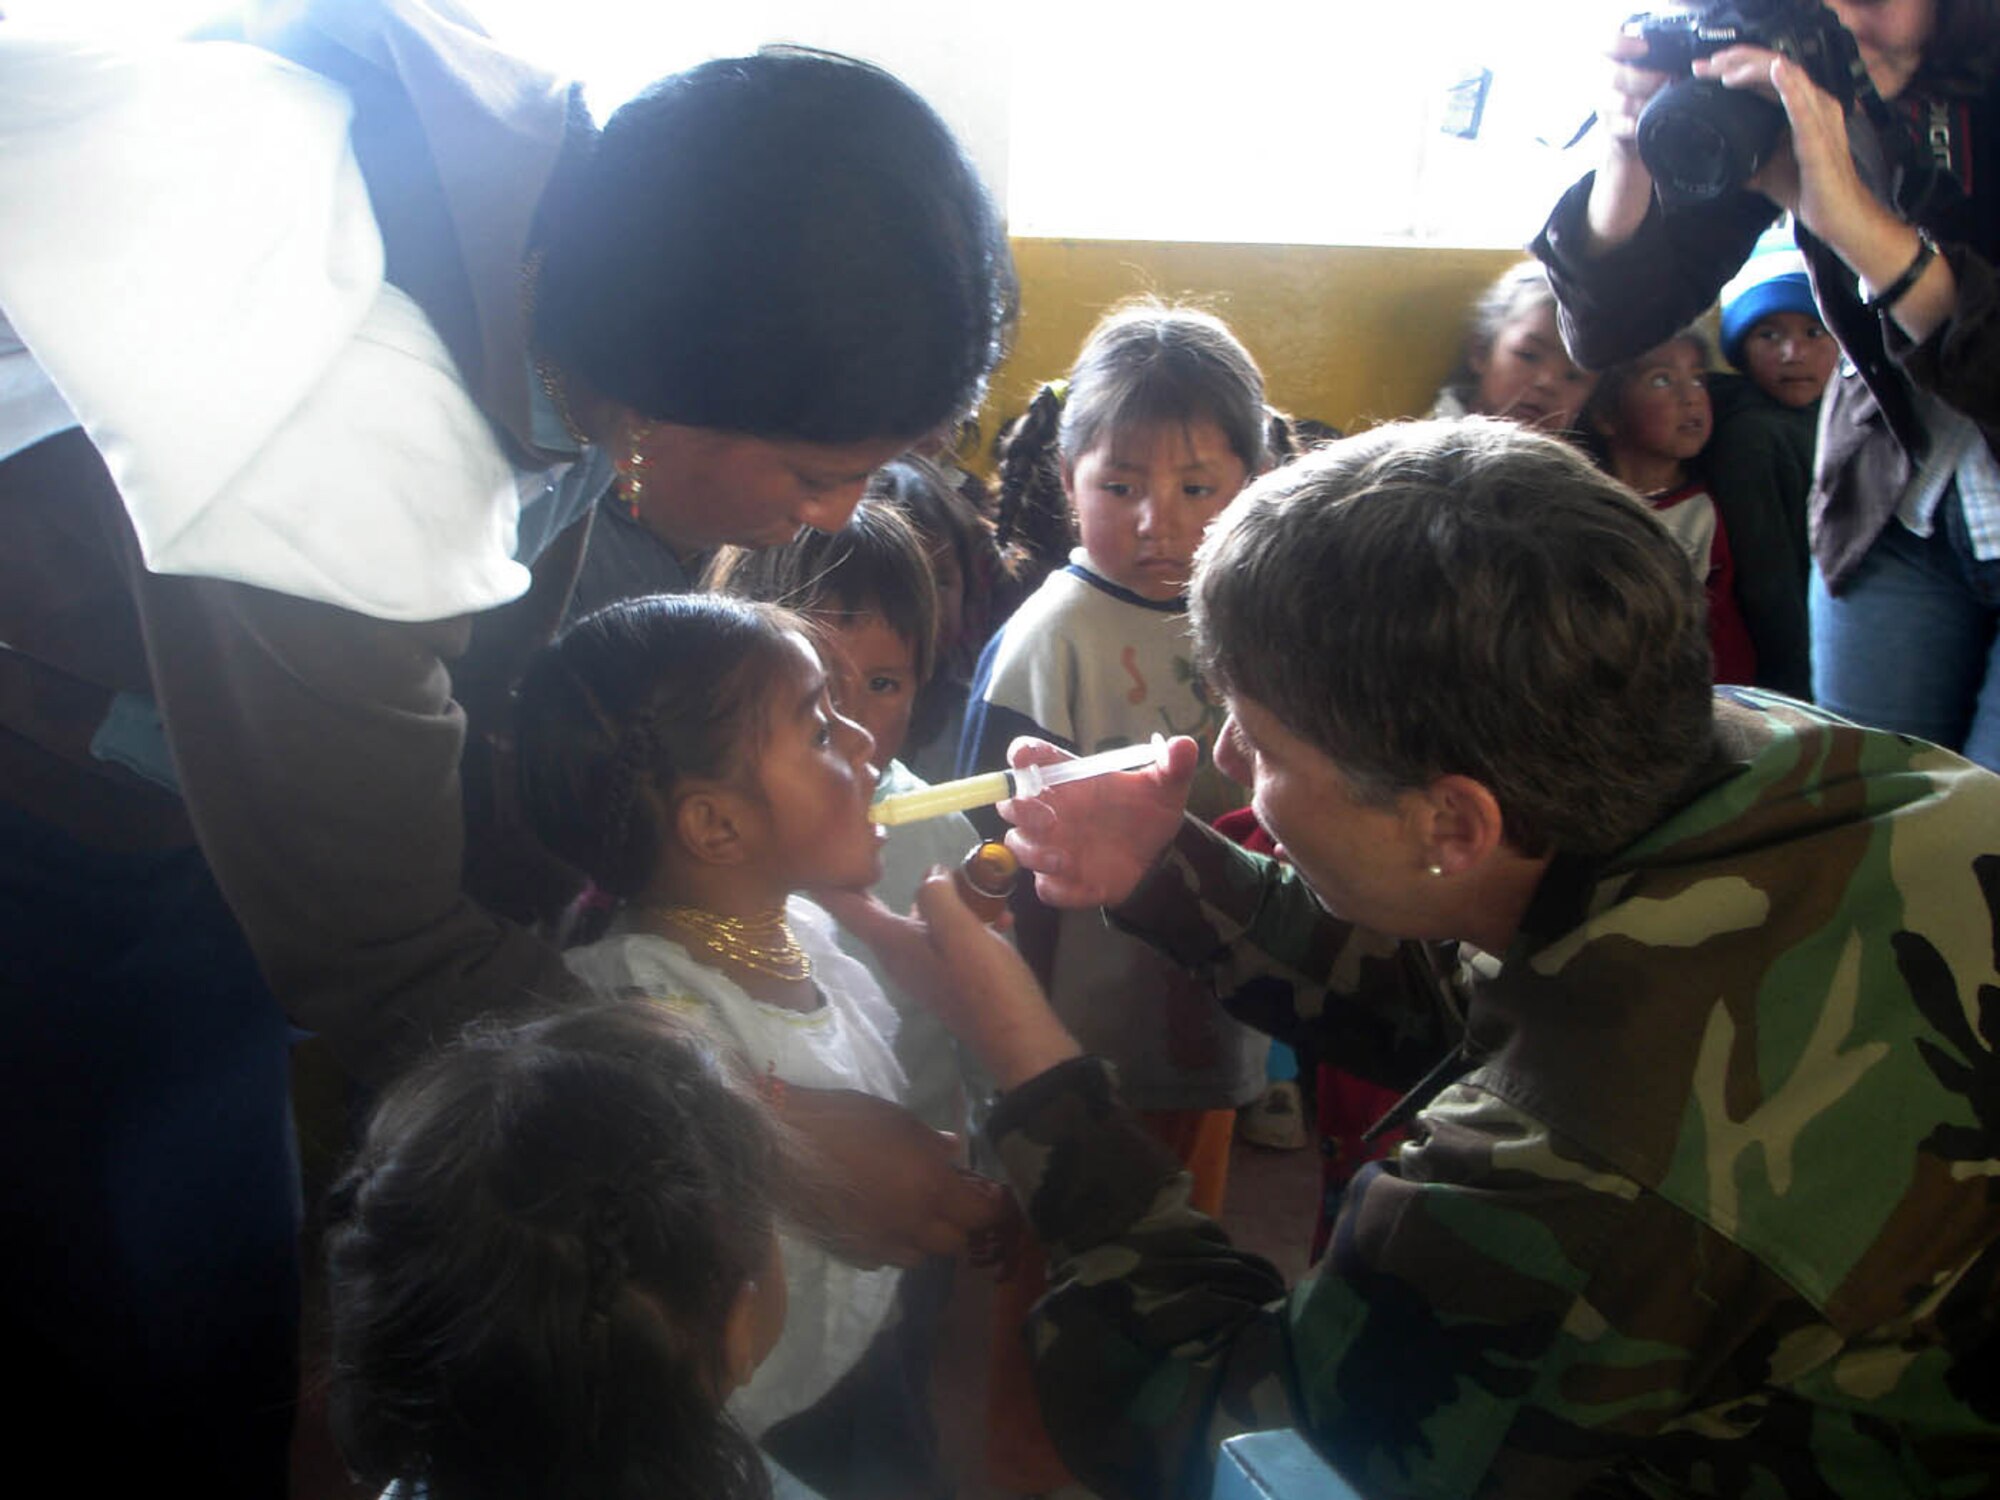 OTAVALO, Ecuador (AFPN) -- Lt. Col. (Dr.) Karen Kinne gives a child anti-parasitic medicine with help from the girl's mother. The anti-parasitic medicine treats gastrointestinal infections that are prevalent in the region. Colonel Kinne is the medical readiness exercise commander for the Air Force team here, and is assigned to the 21st Medical Group at Peterson Air Force Base, Colo. (U.S. Air Force photo by Capt. Kim Melchor) 